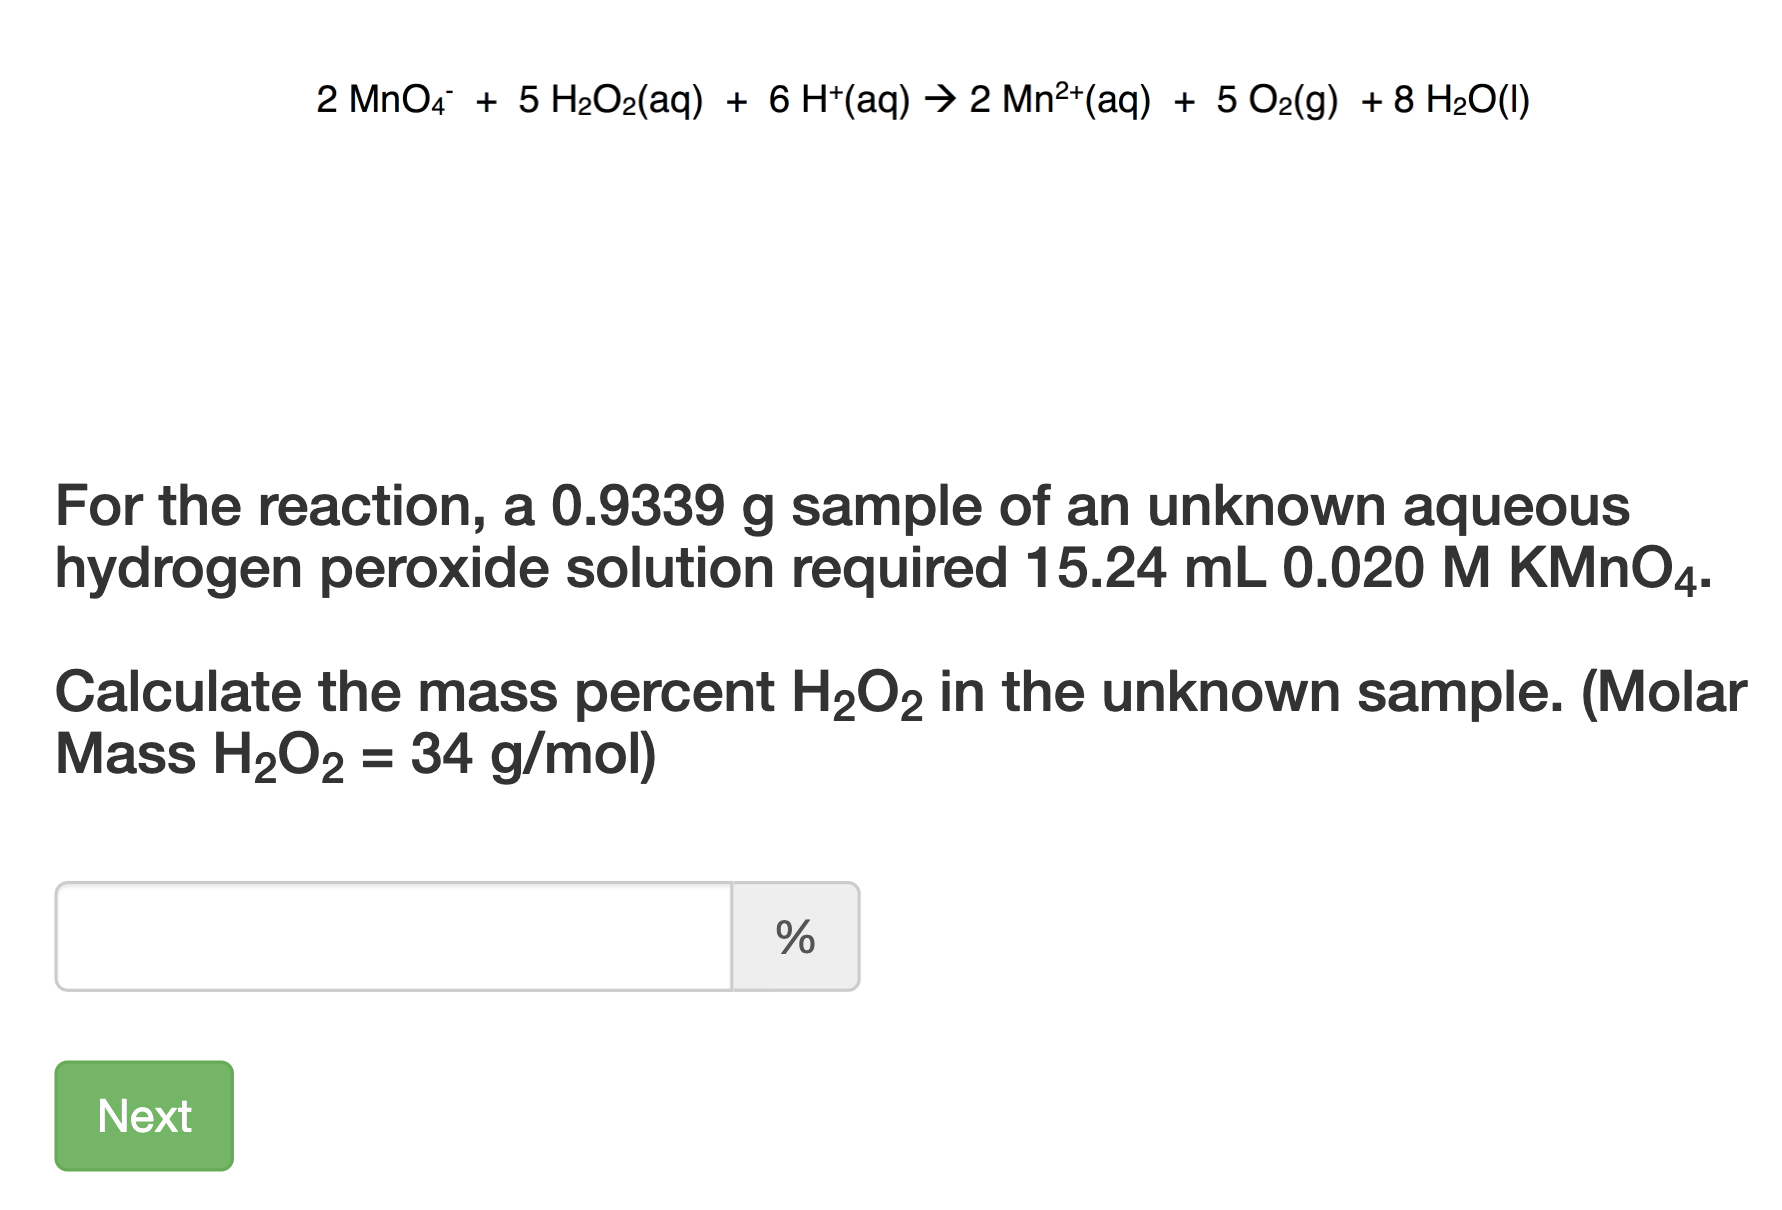 2 MnO4 + 5 H2O2(aq) + 6 H*(aq) → 2 Mn²*(aq) + 5 O2(g) + 8 H20(1)
For the reaction, a 0.9339 g sample of an unknown aqueous
hydrogen peroxide solution required 15.24 mL 0.020 M KMNO4.
Calculate the mass percent H2O2 in the unknown sample. (Molar
Mass H202 = 34 g/mol)
Next
96
